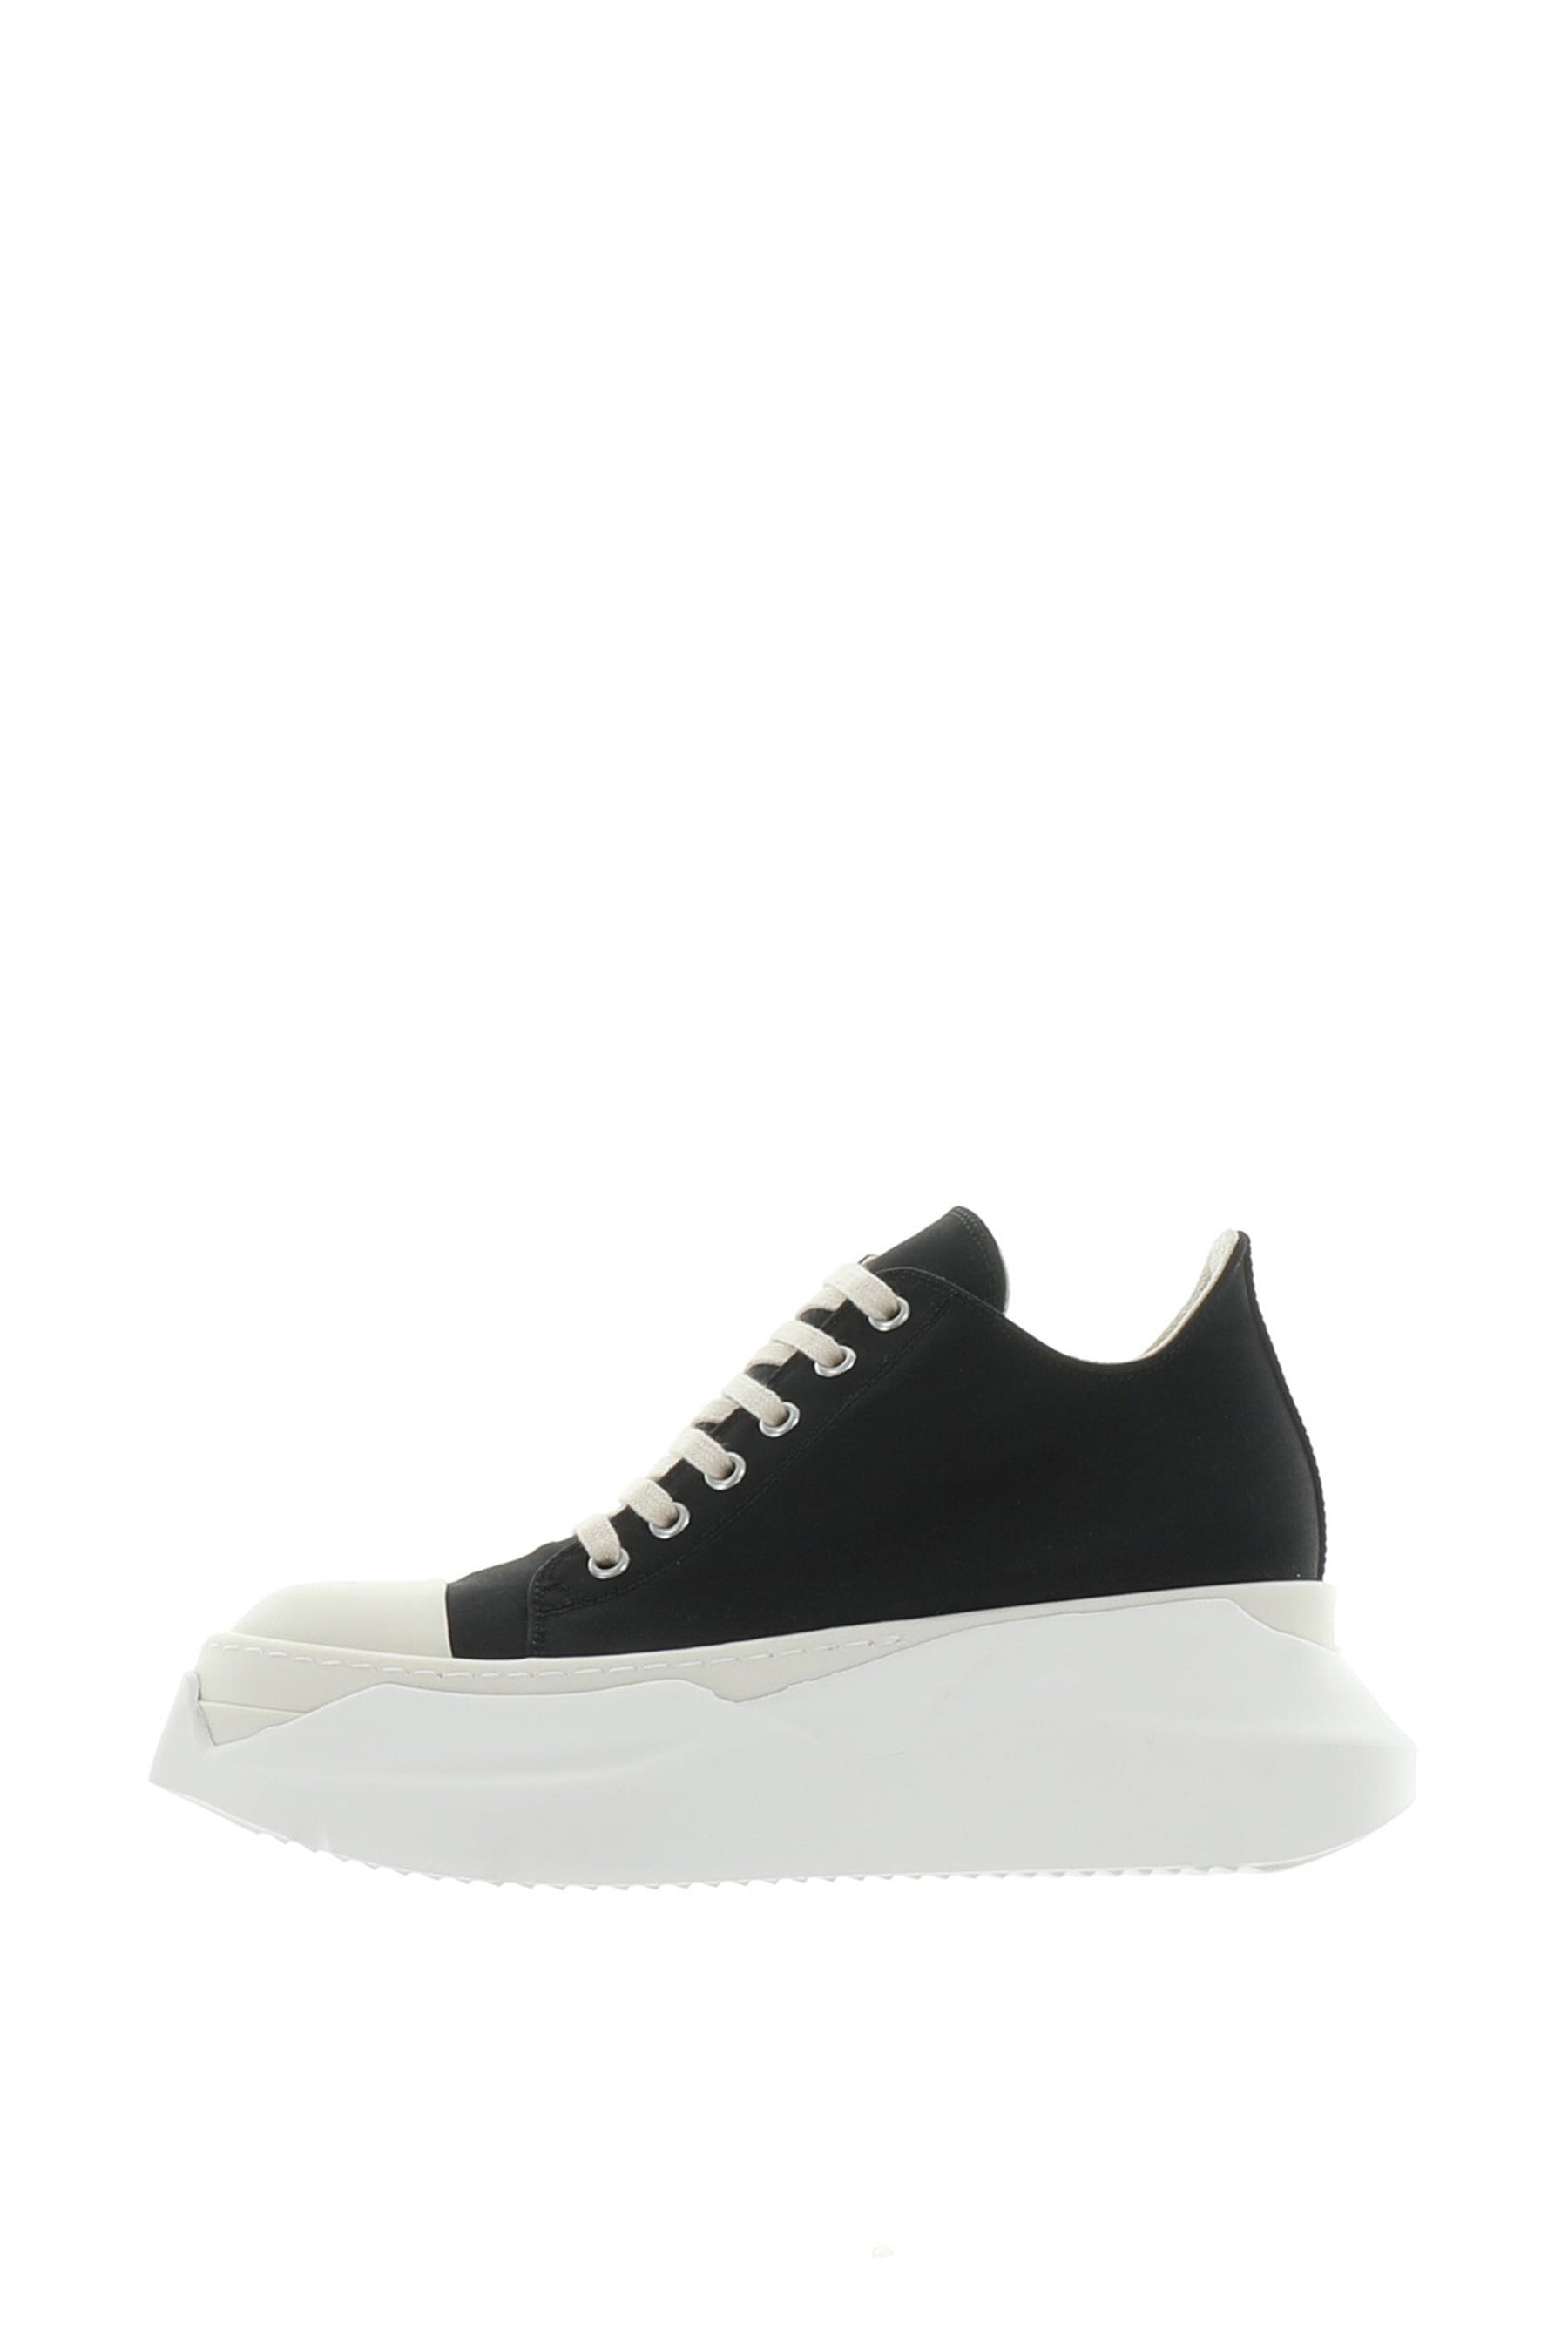 Rick Owens drkshdw abstract low/リックオウエンス